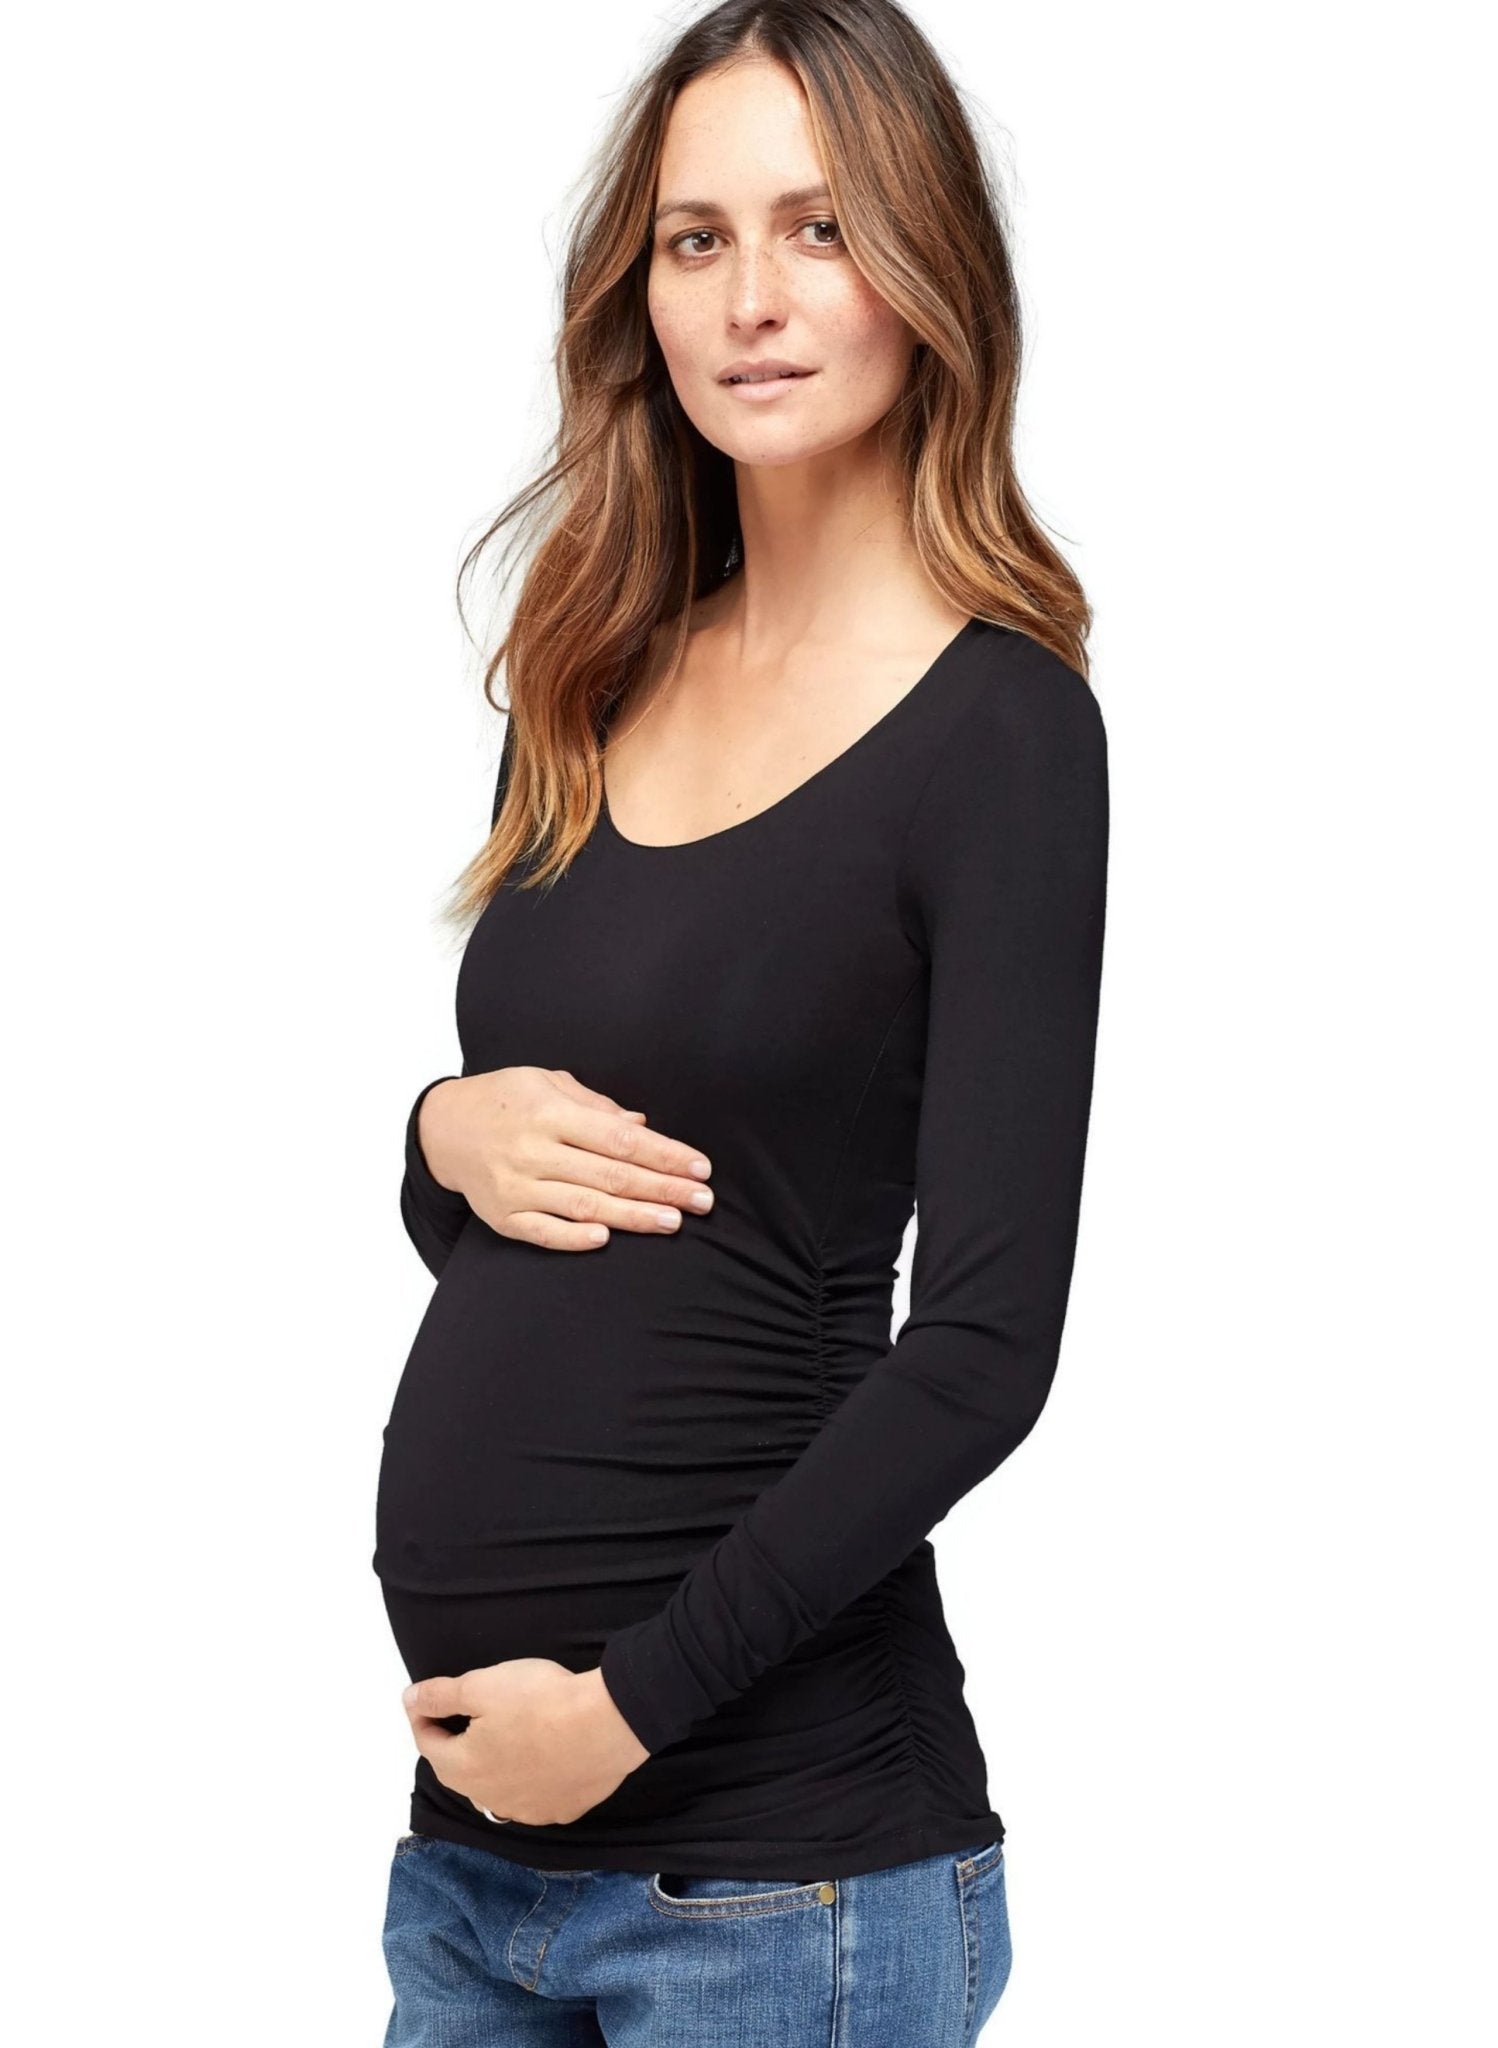 The Maternity Scoop Top - Black - Mums and Bumps